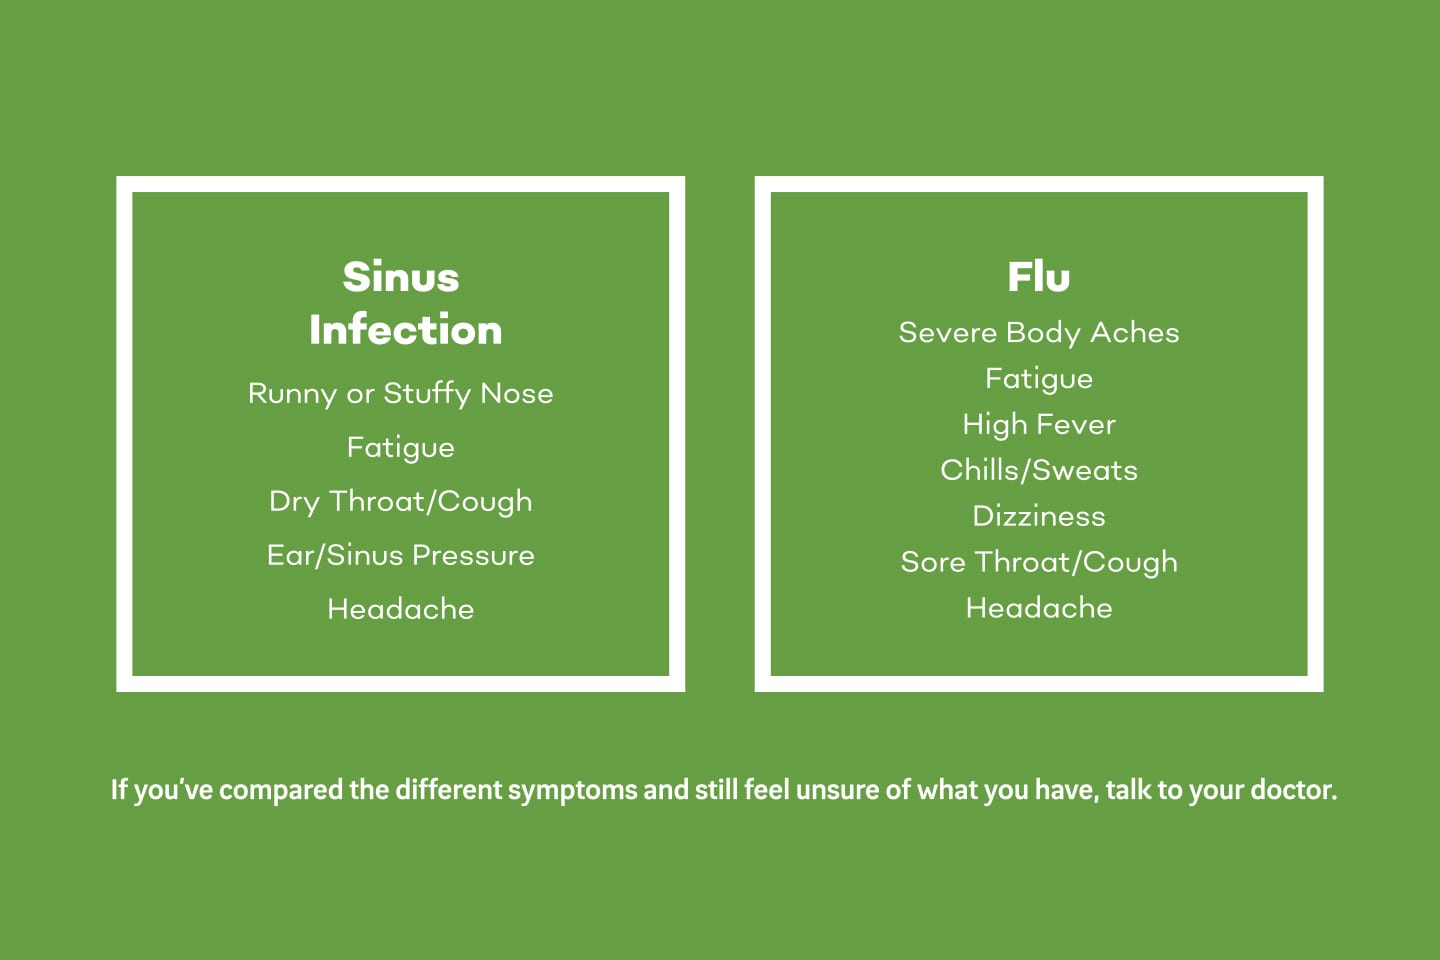 Sinus Infection and Flu Symptoms